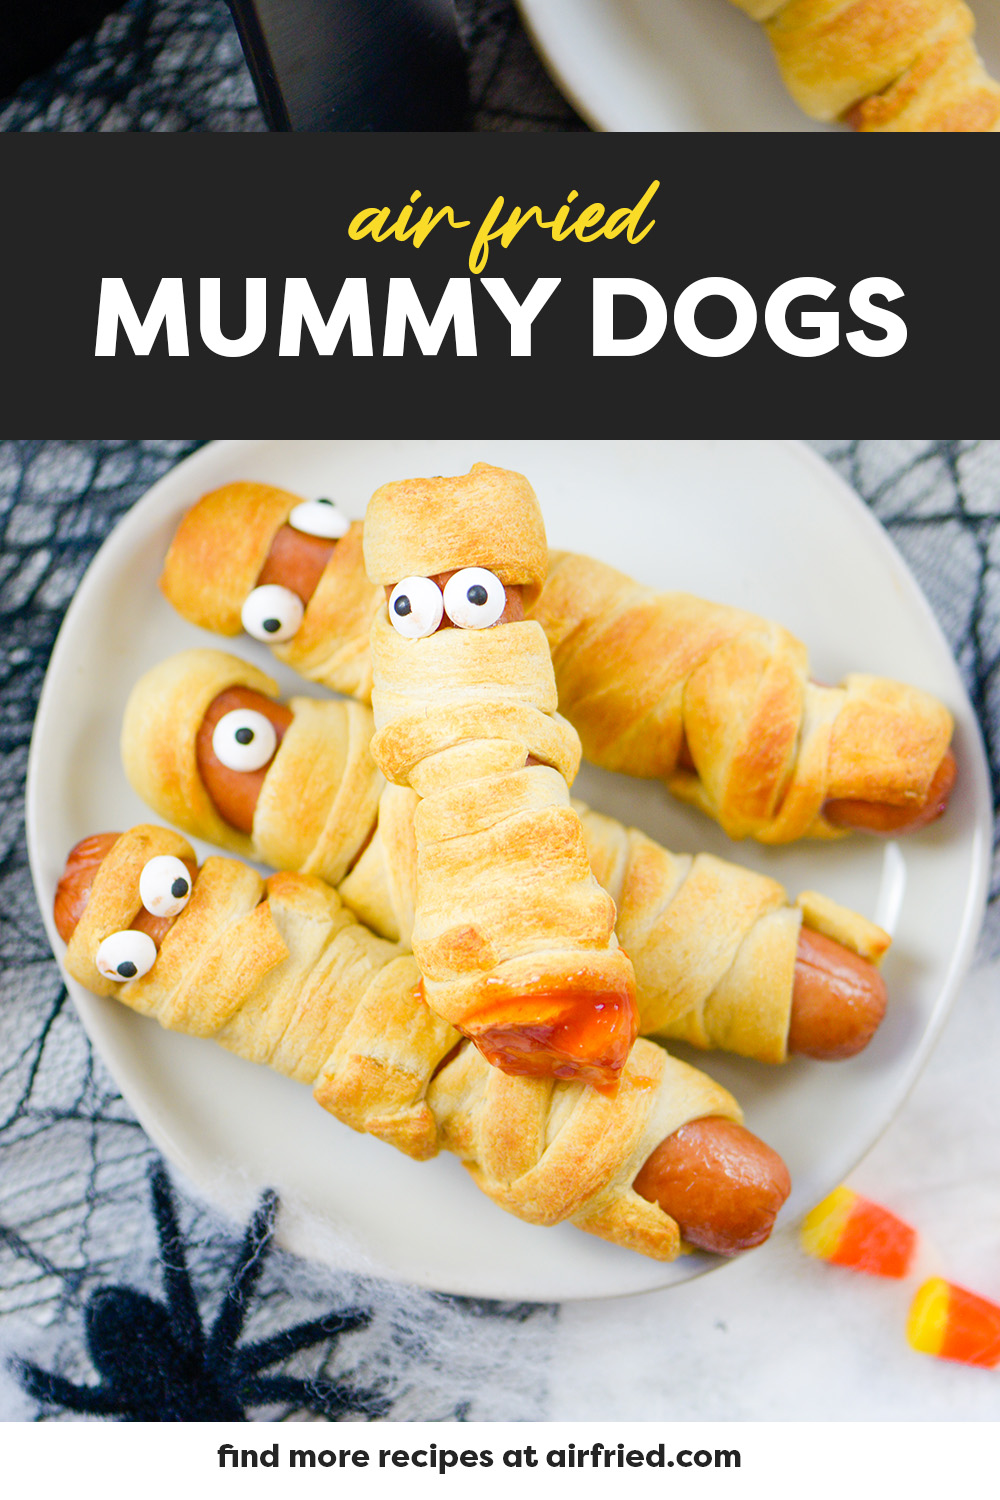 Four mummy dogs on a small white plate.